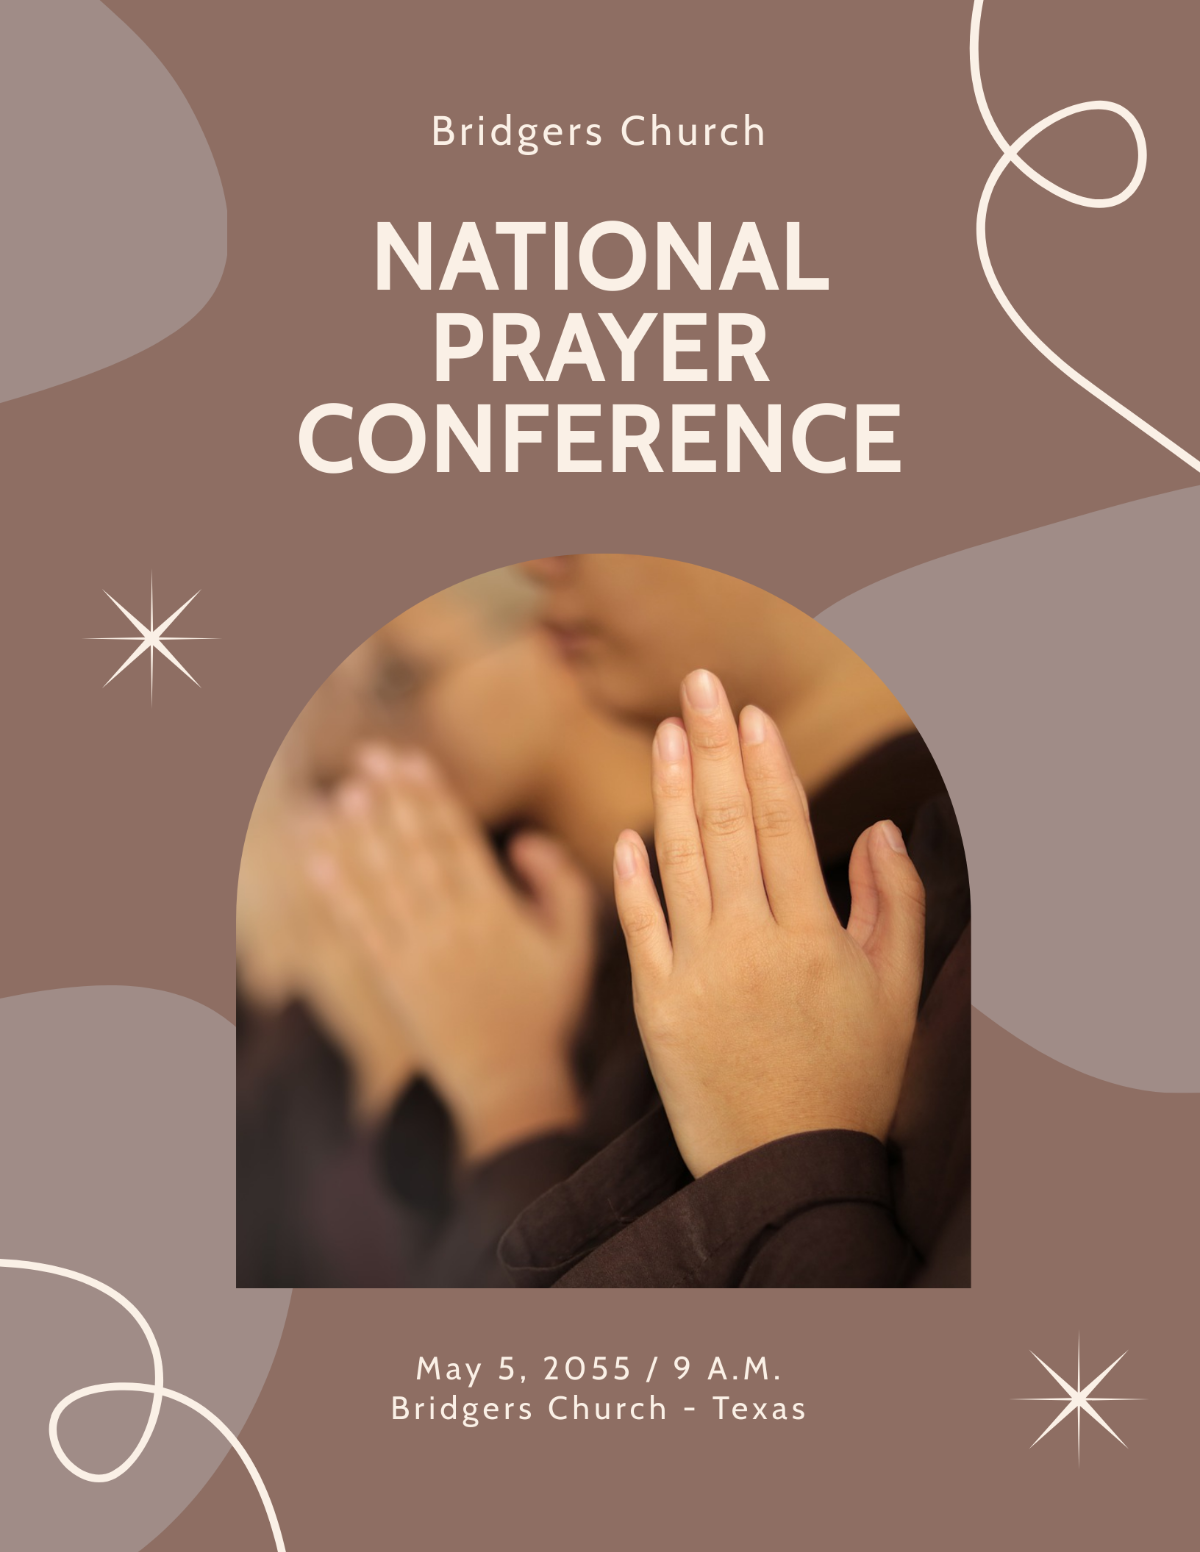 National Prayer Conference Flyer Template